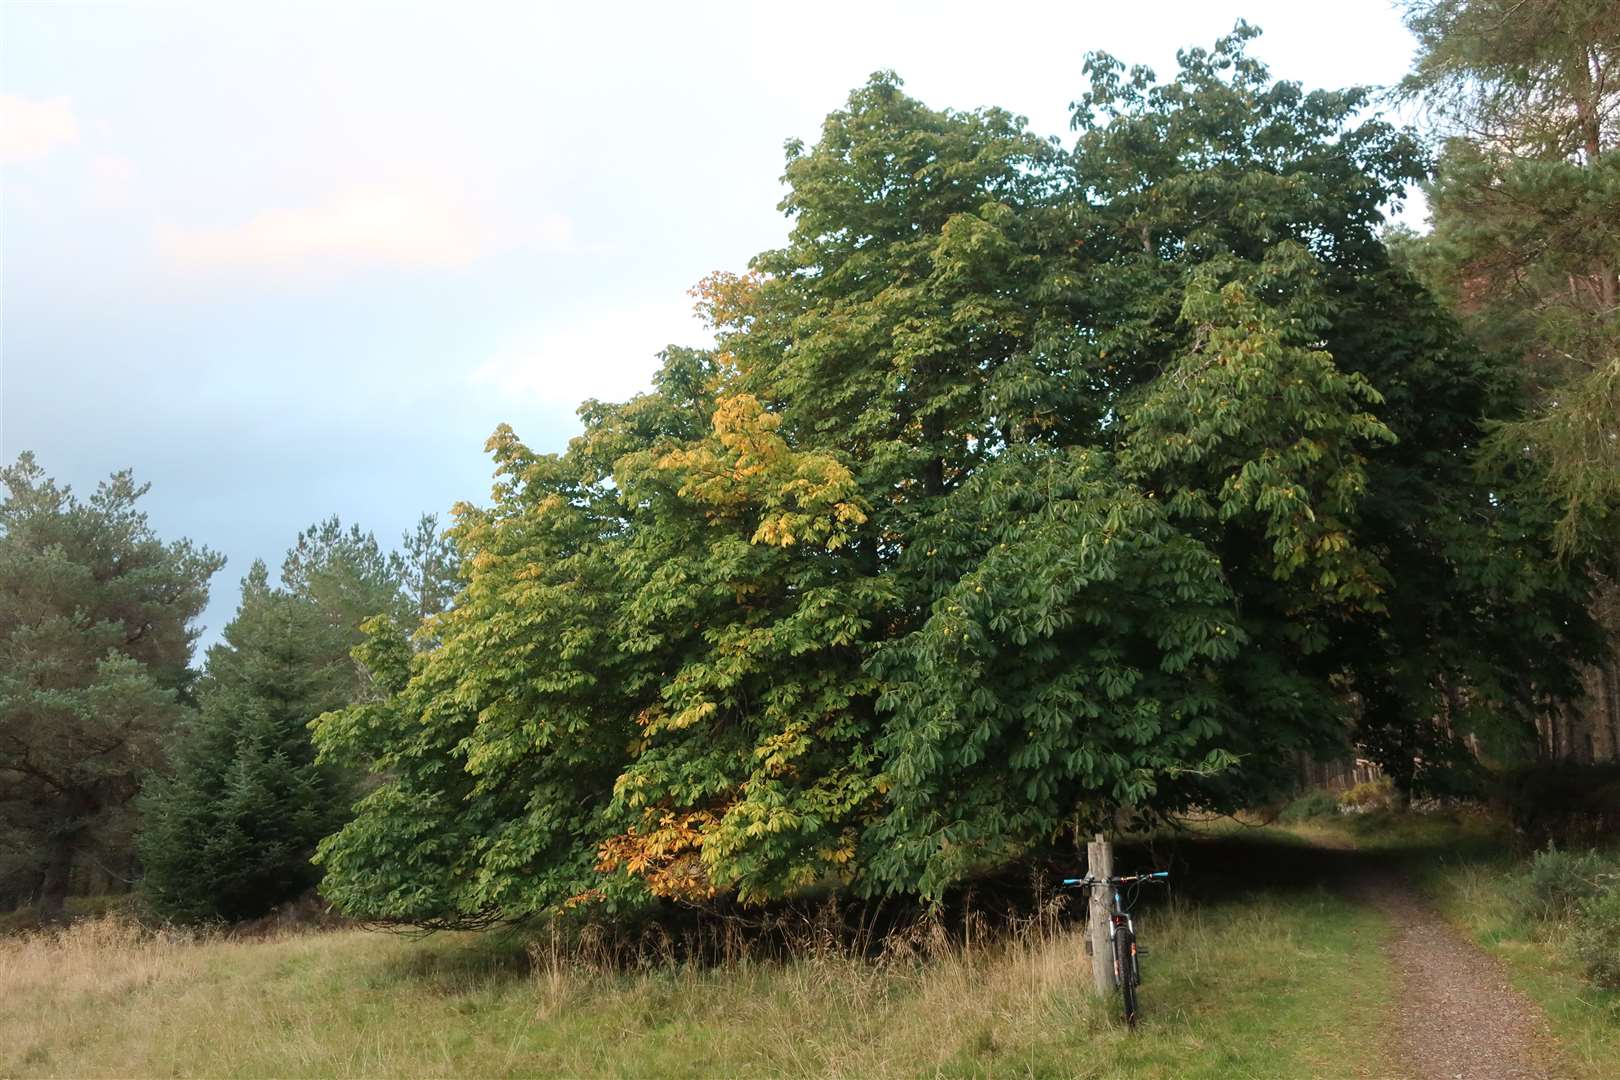 The two large horse chestnut trees at the drove stance along hte Great Glen Way.